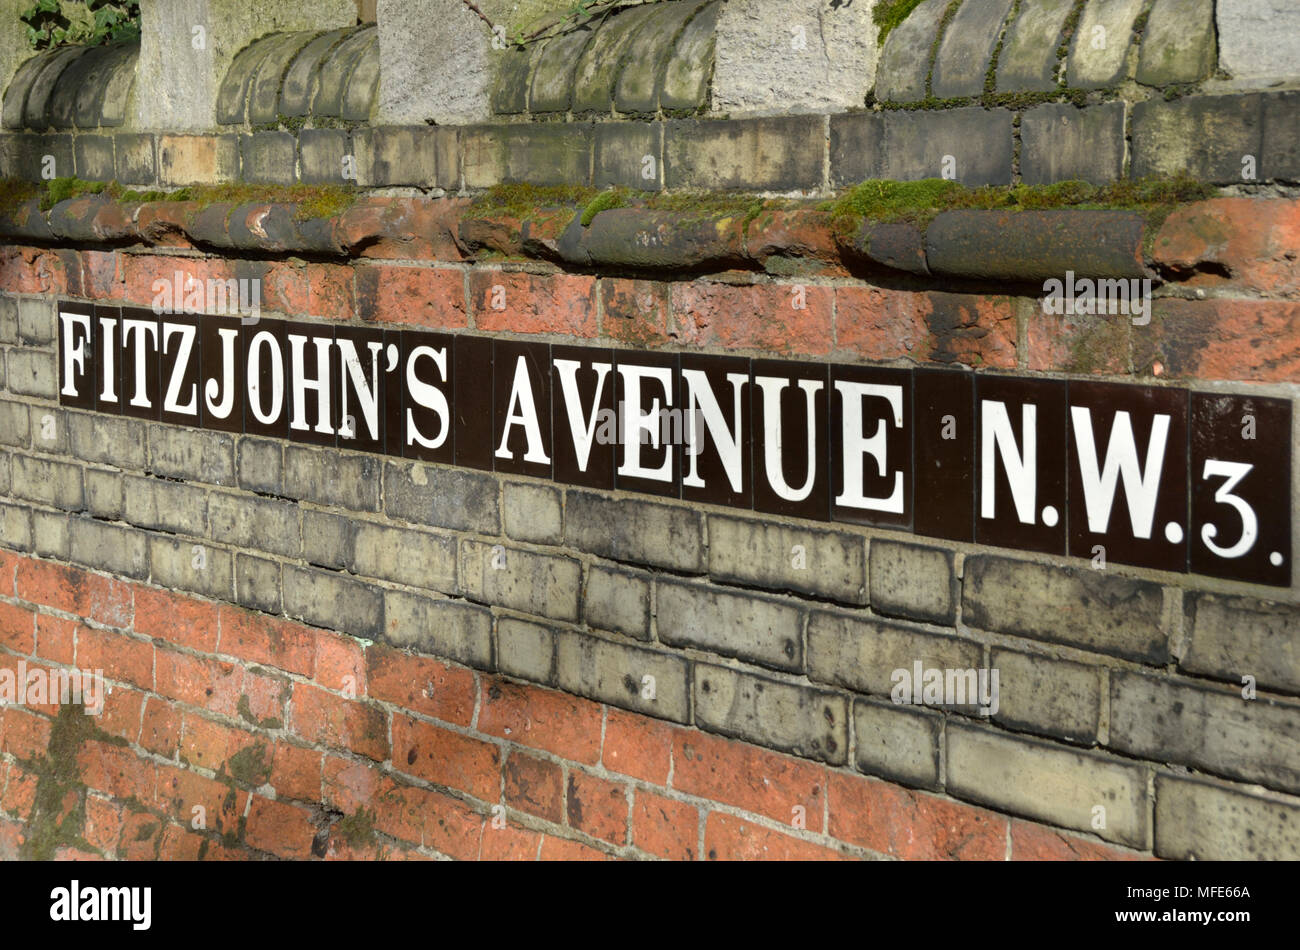 Fitzjohn’s Avenue NW3 street sign on a wall, Hampstead, London, UK. Stock Photo